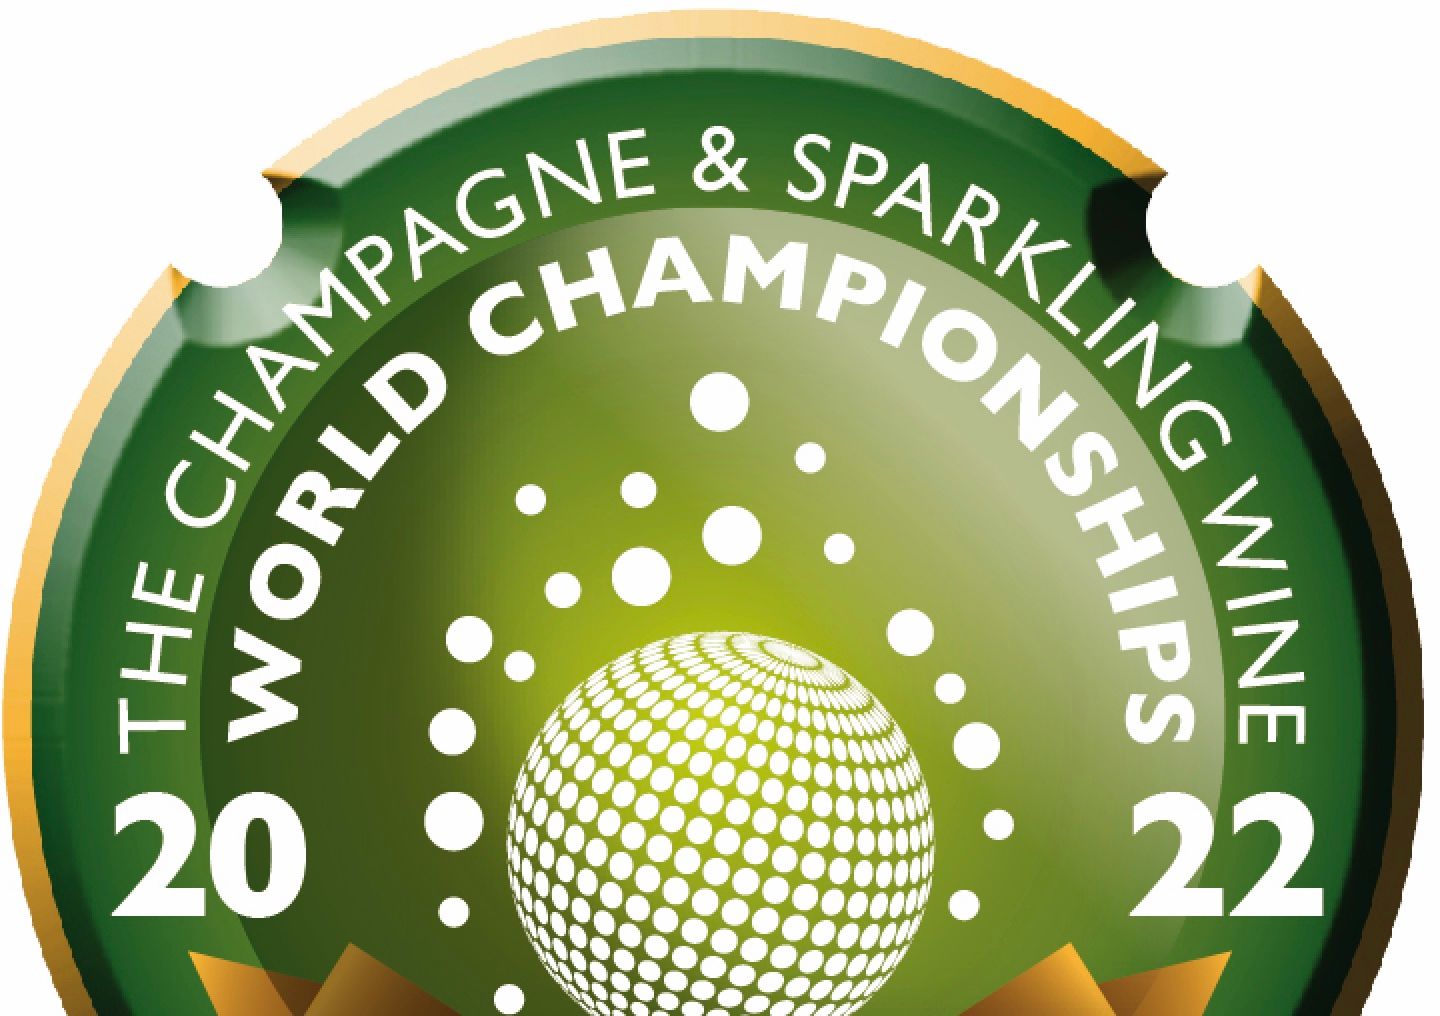 Champagne & Sparkling Wine World Championships’ medals